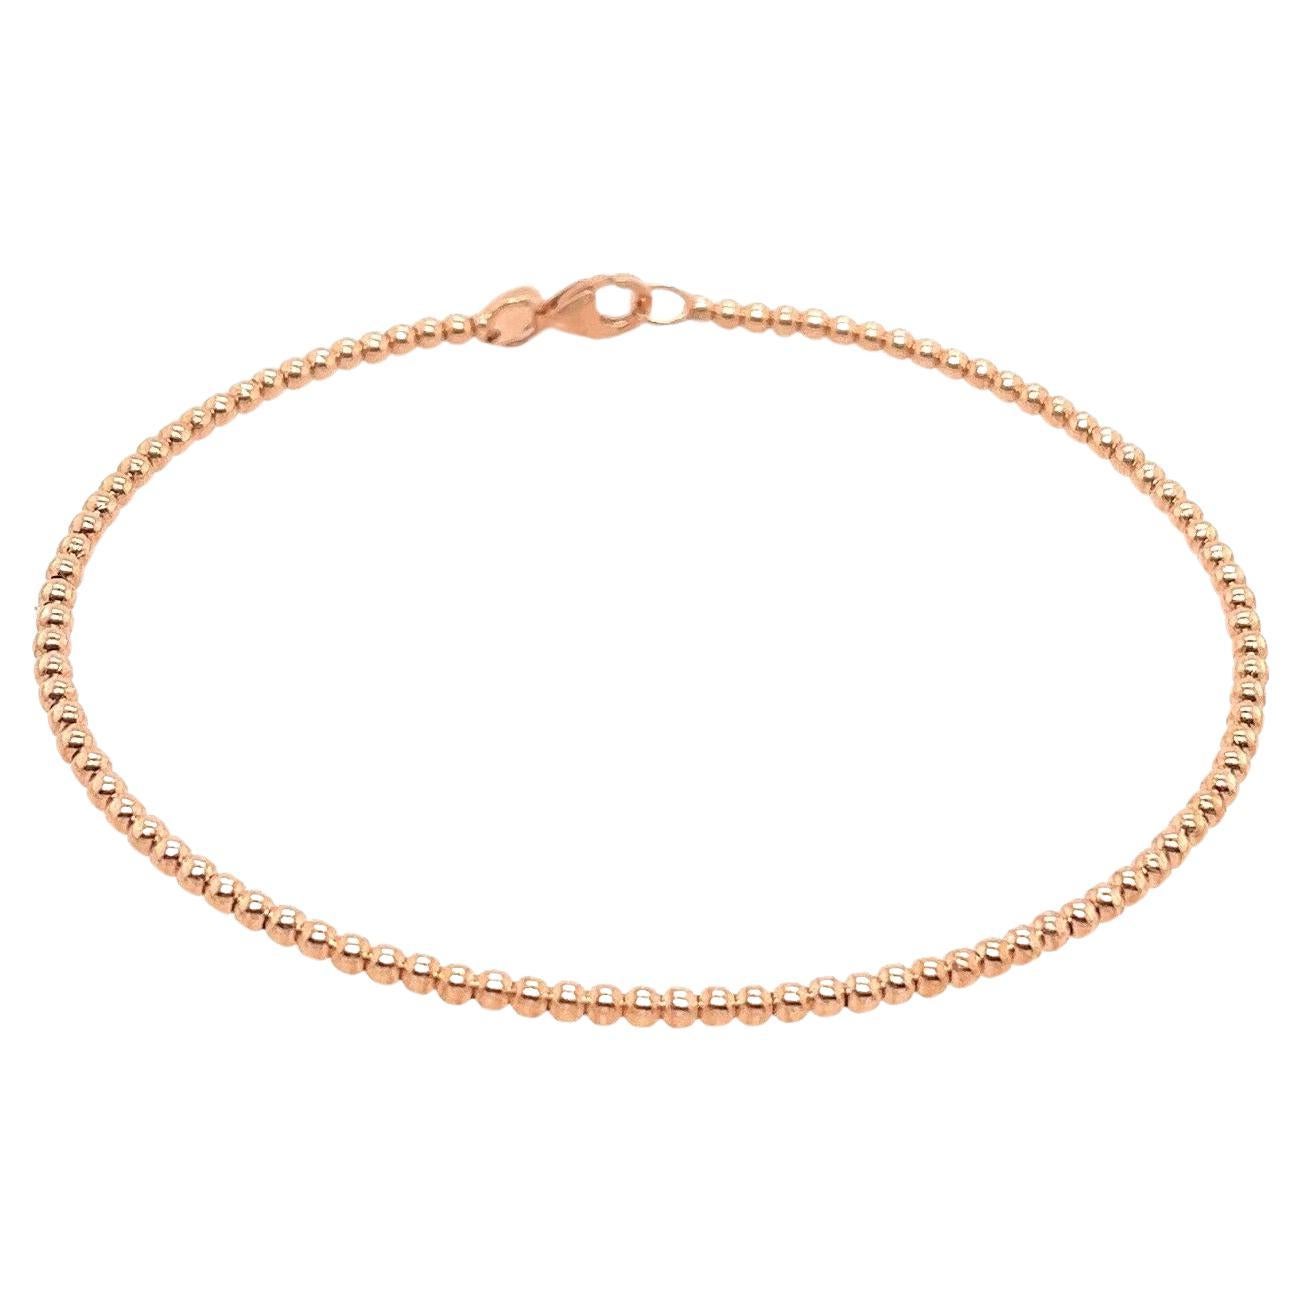 Wide Bead Oval Gold Bangle with Trigger Catch Fitting in 14ct Rose Gold For Sale